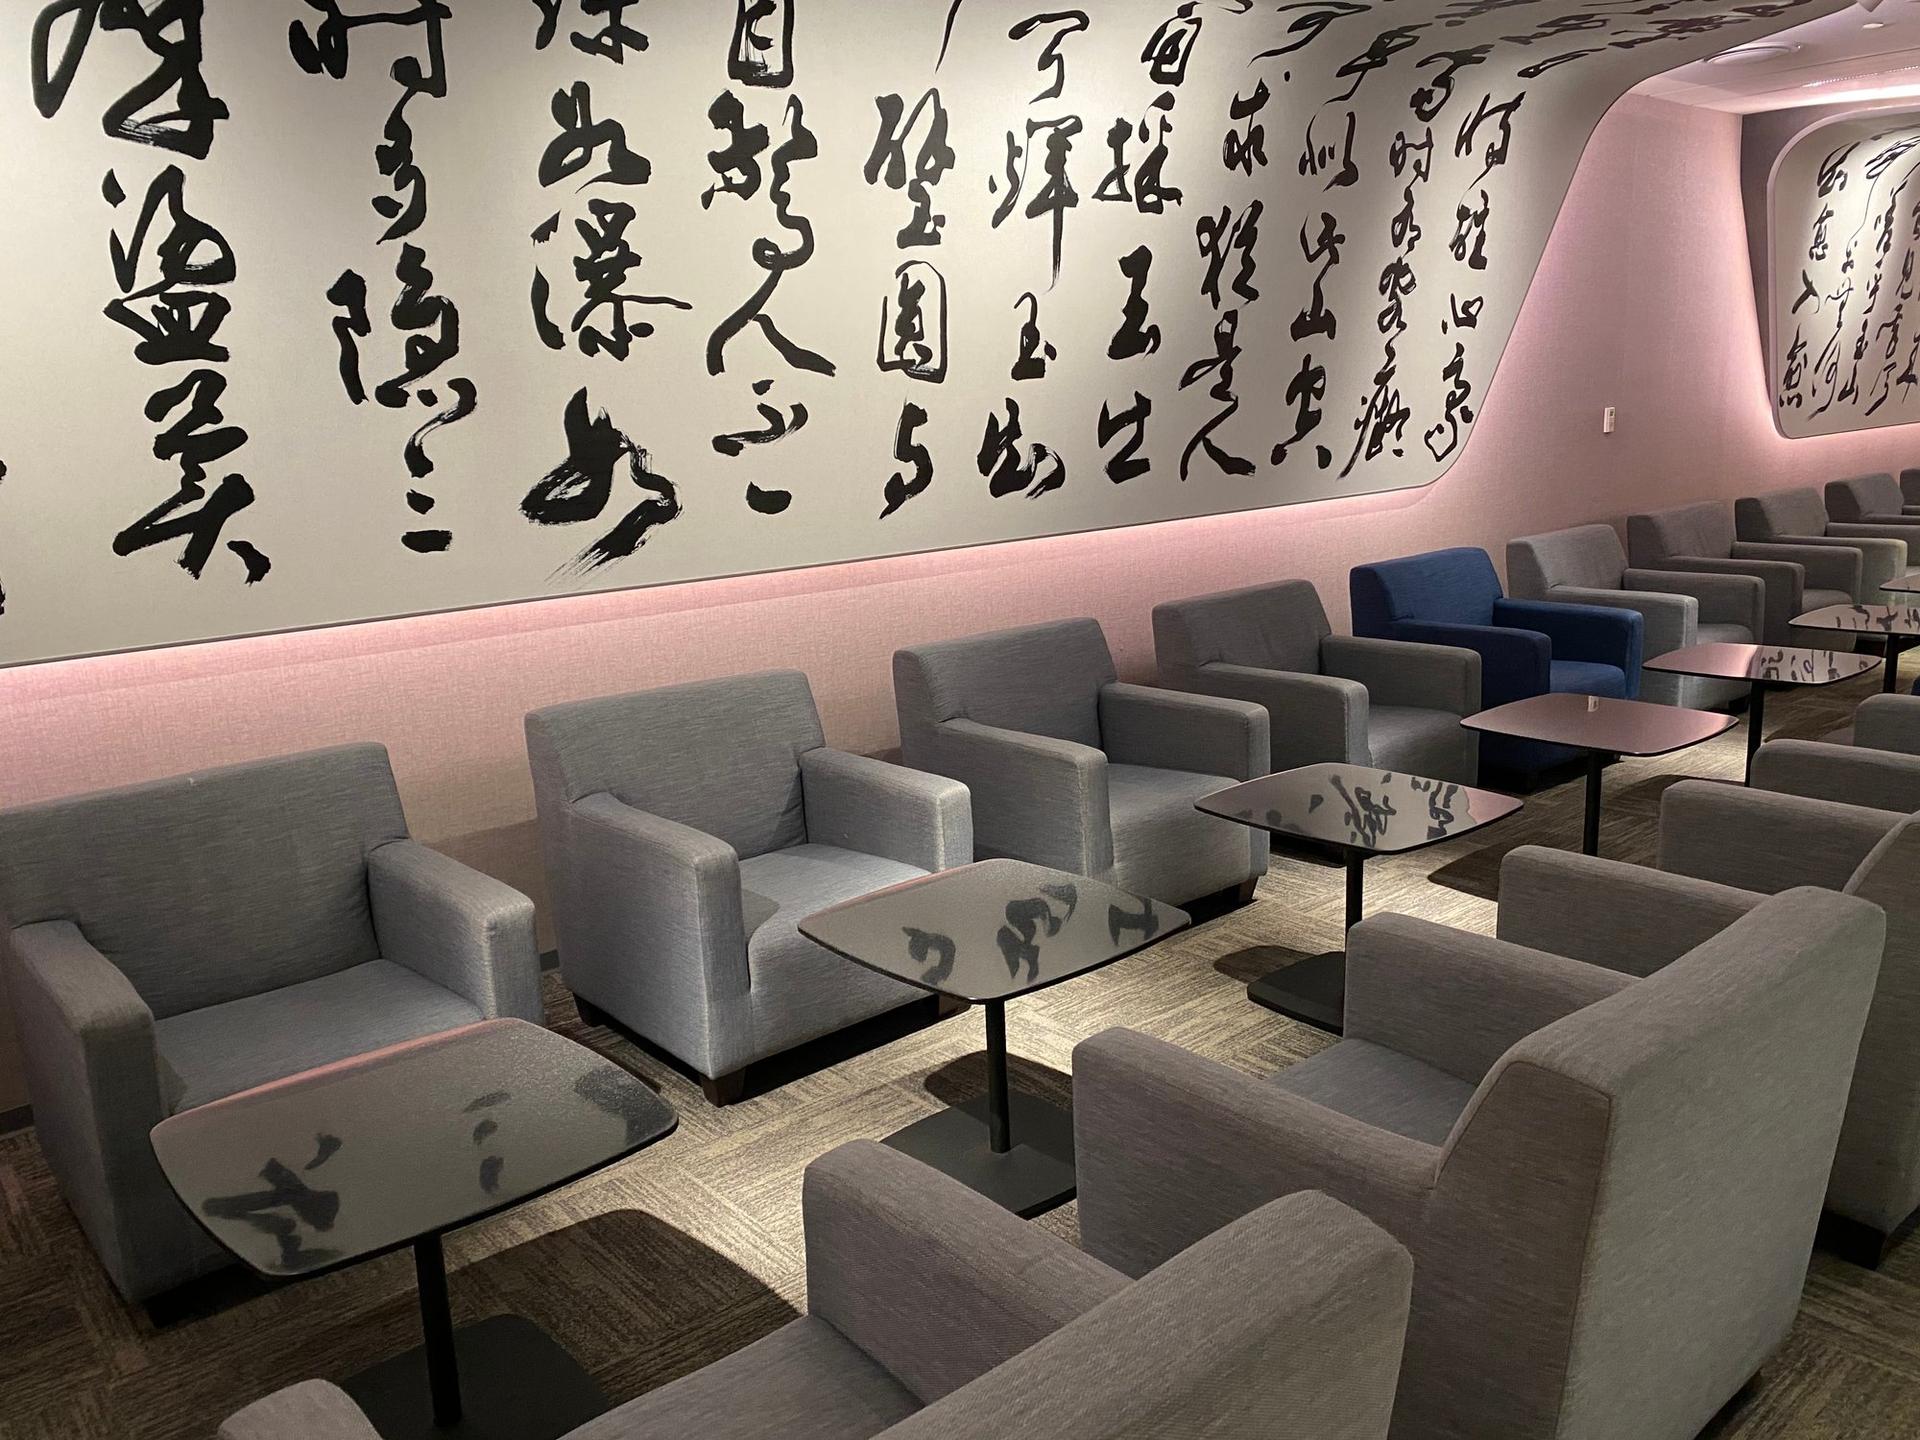 China Airlines Lounge (V2) image 14 of 20